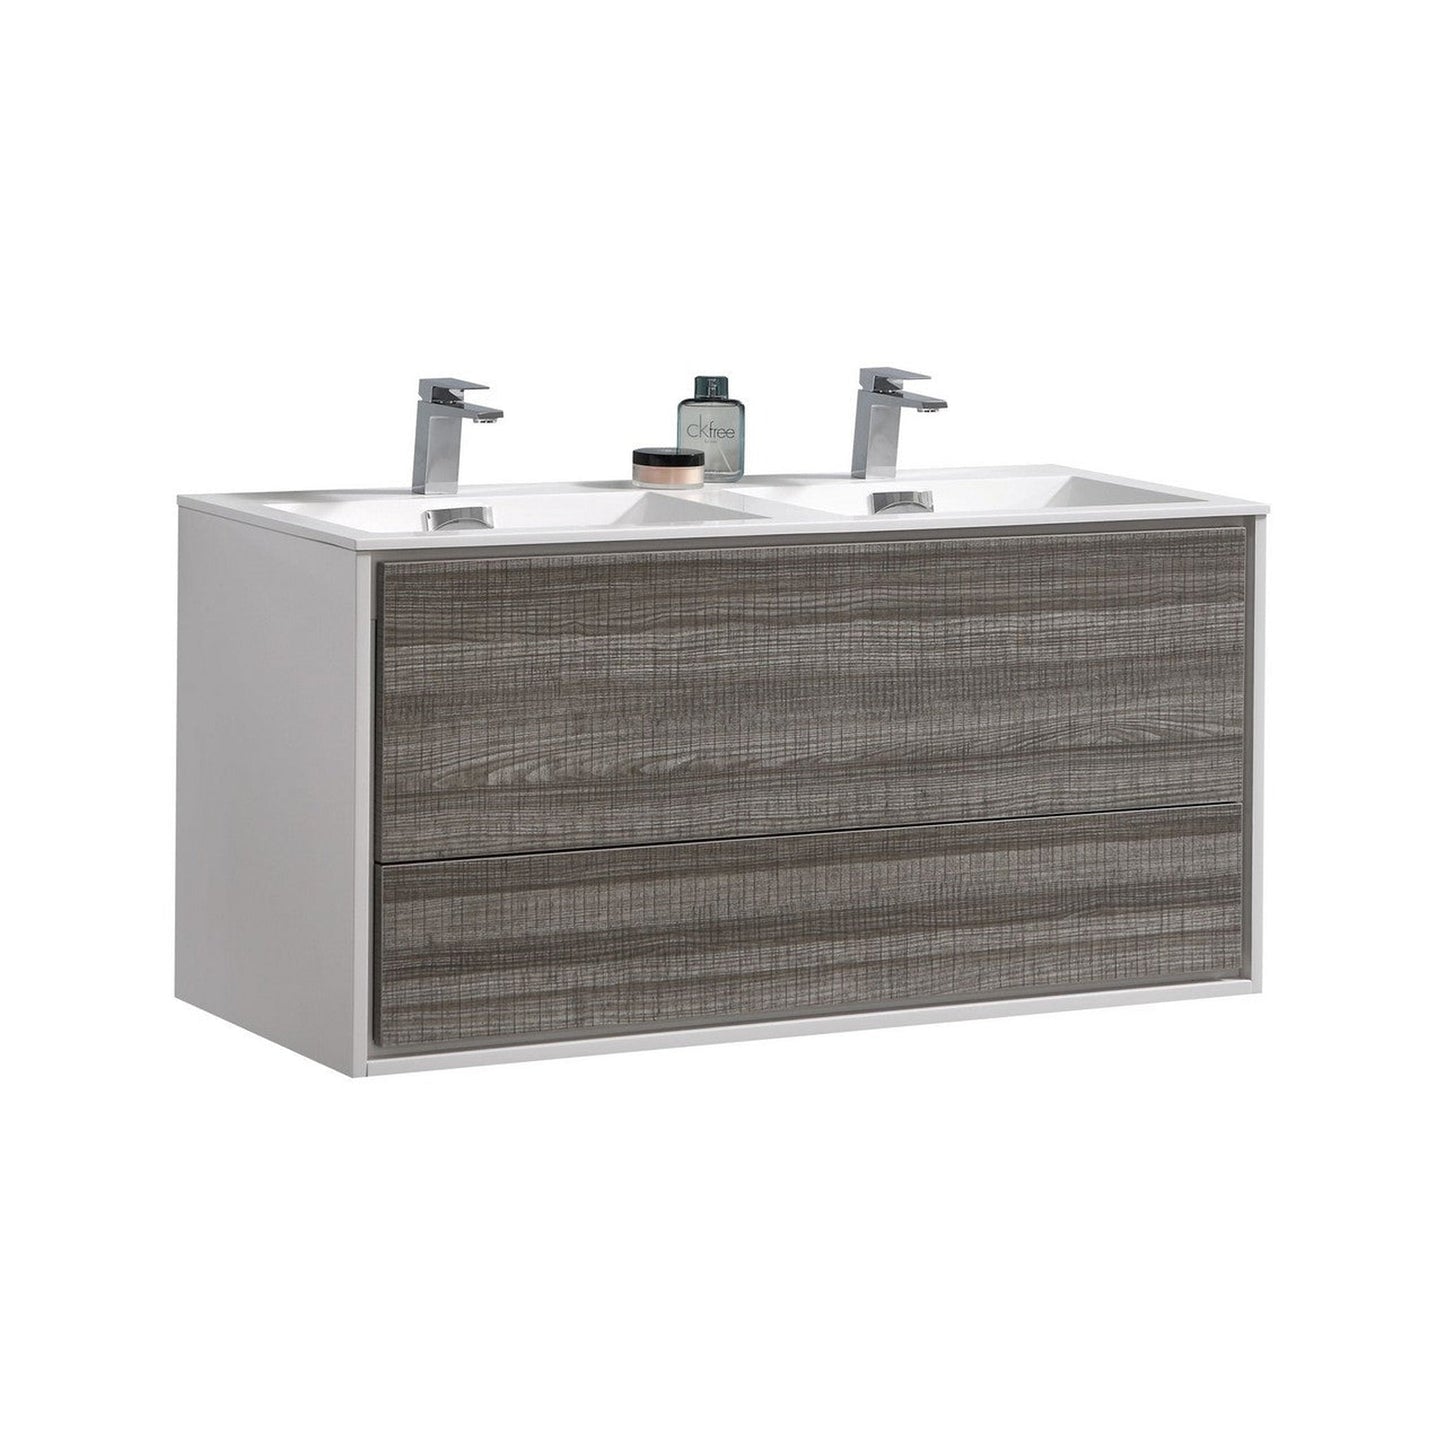 KubeBath DeLusso 48" Ash Gray Wall-Mounted Modern Bathroom Vanity With Double Integrated Acrylic Sink With Overflow and 48" White Framed Mirror With Shelf